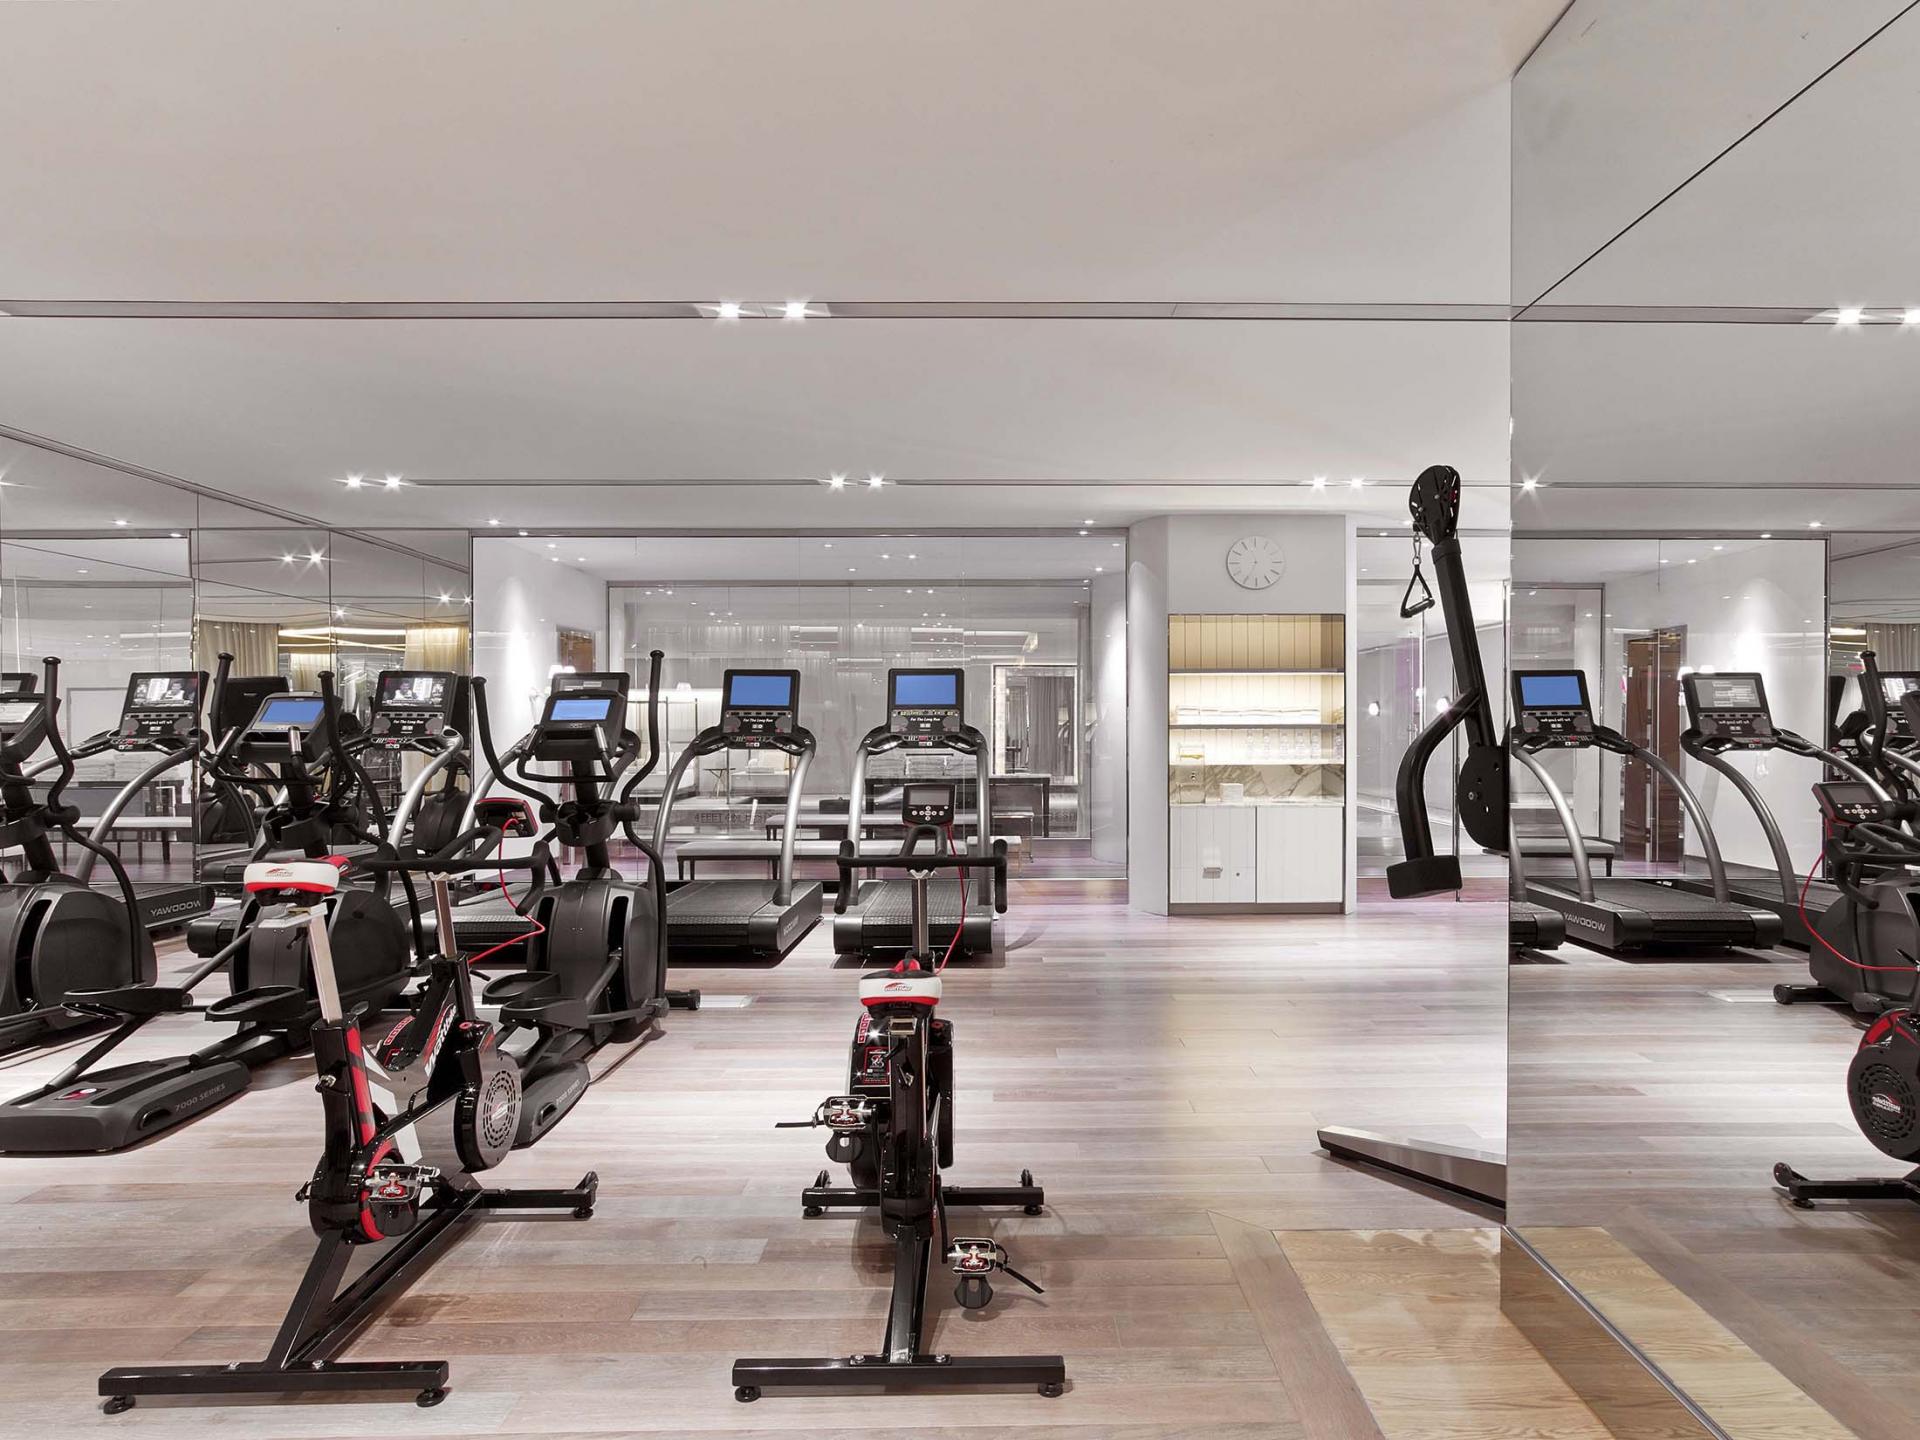 Baccarat hotel fitness center gym, treadmills and bicycles